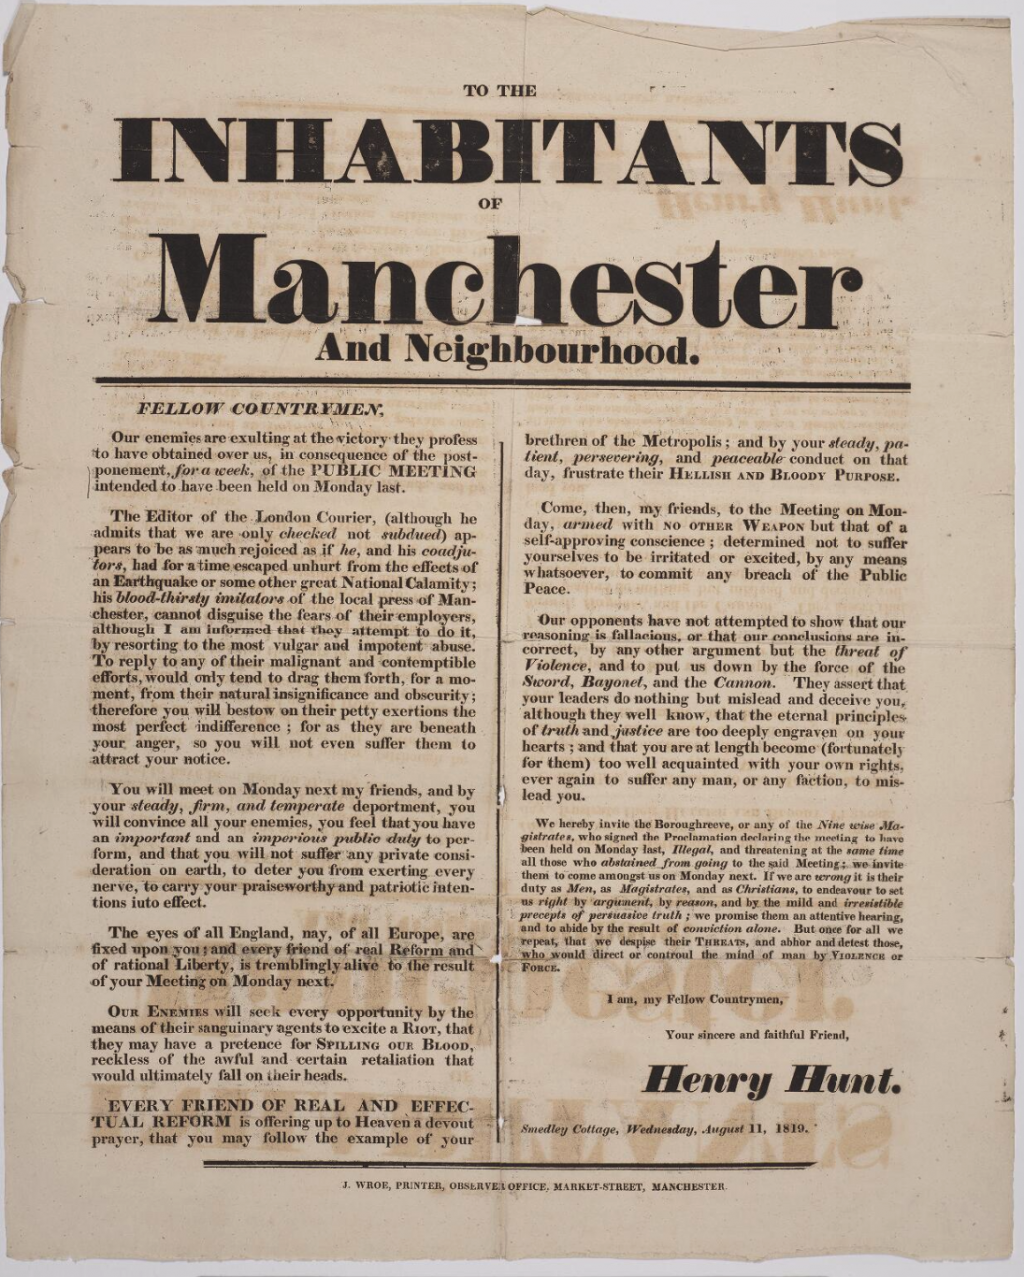 "Placard issued by Henry Hunt, calling the inhabitants of Manchester to a public meeting on Monday [16 August], 'armed with no other weapon but that of a self-approving conscience; determined